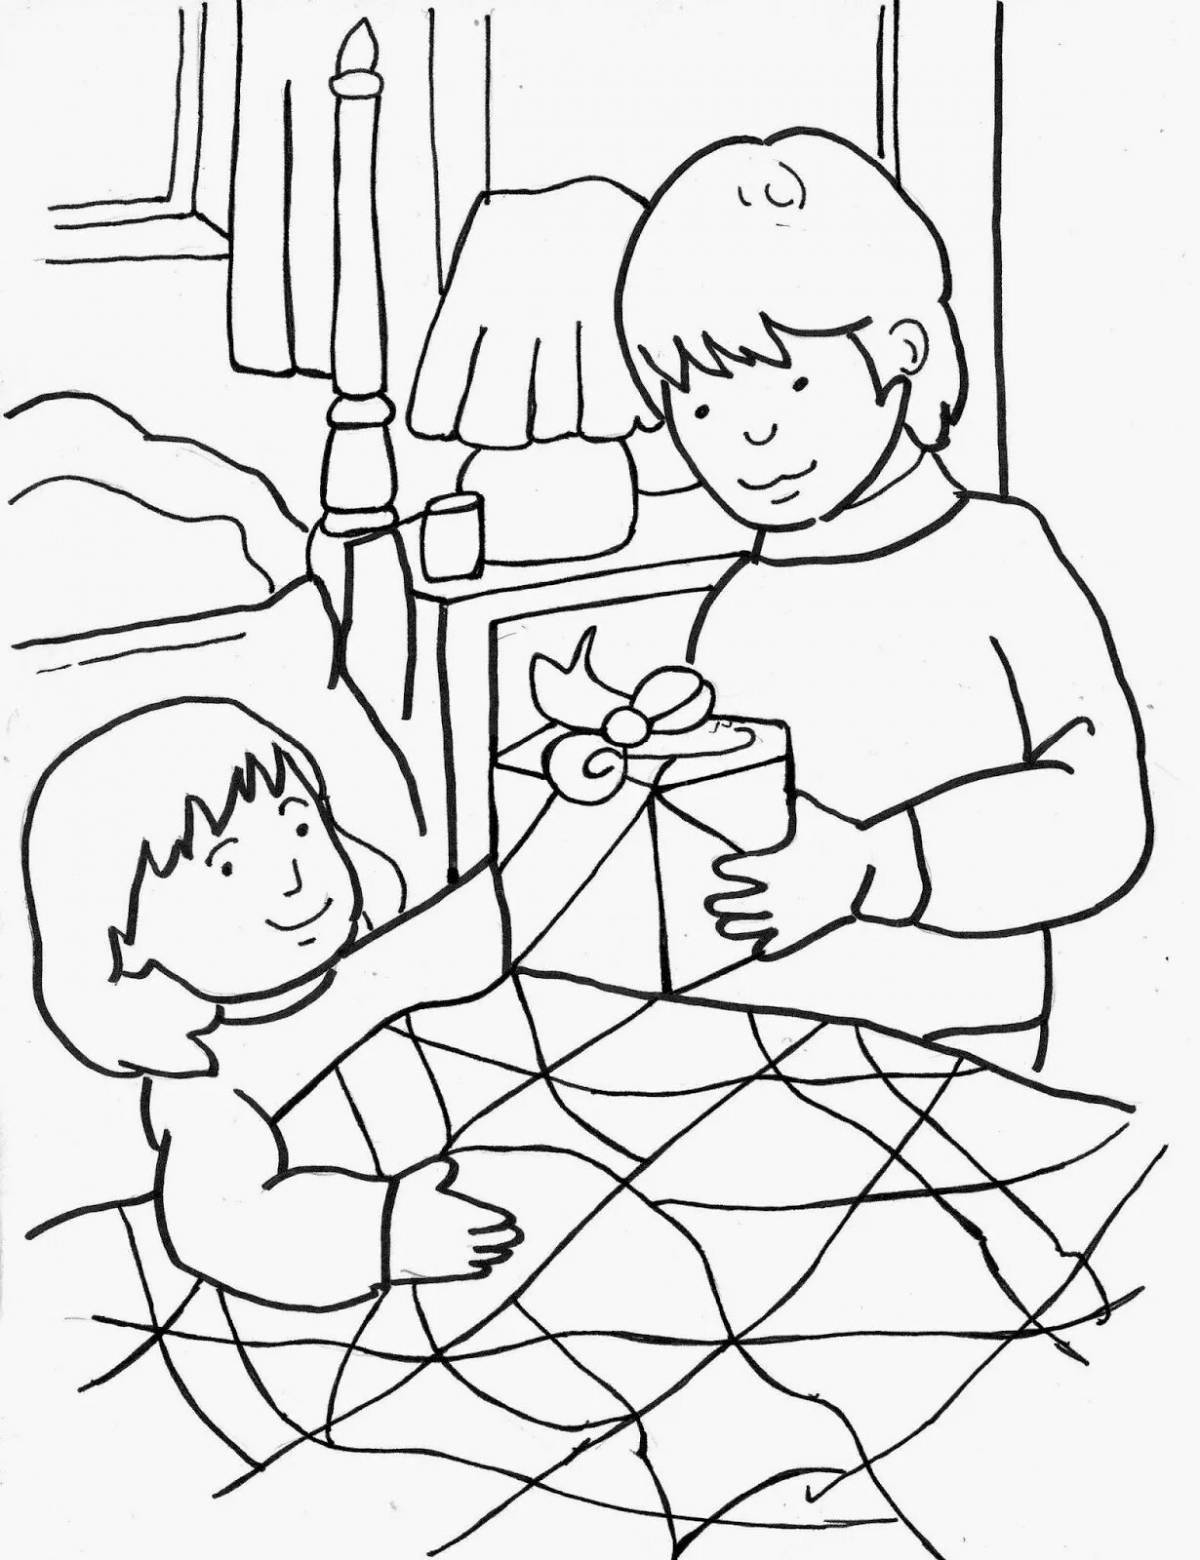 Inspirational Good Deeds coloring page